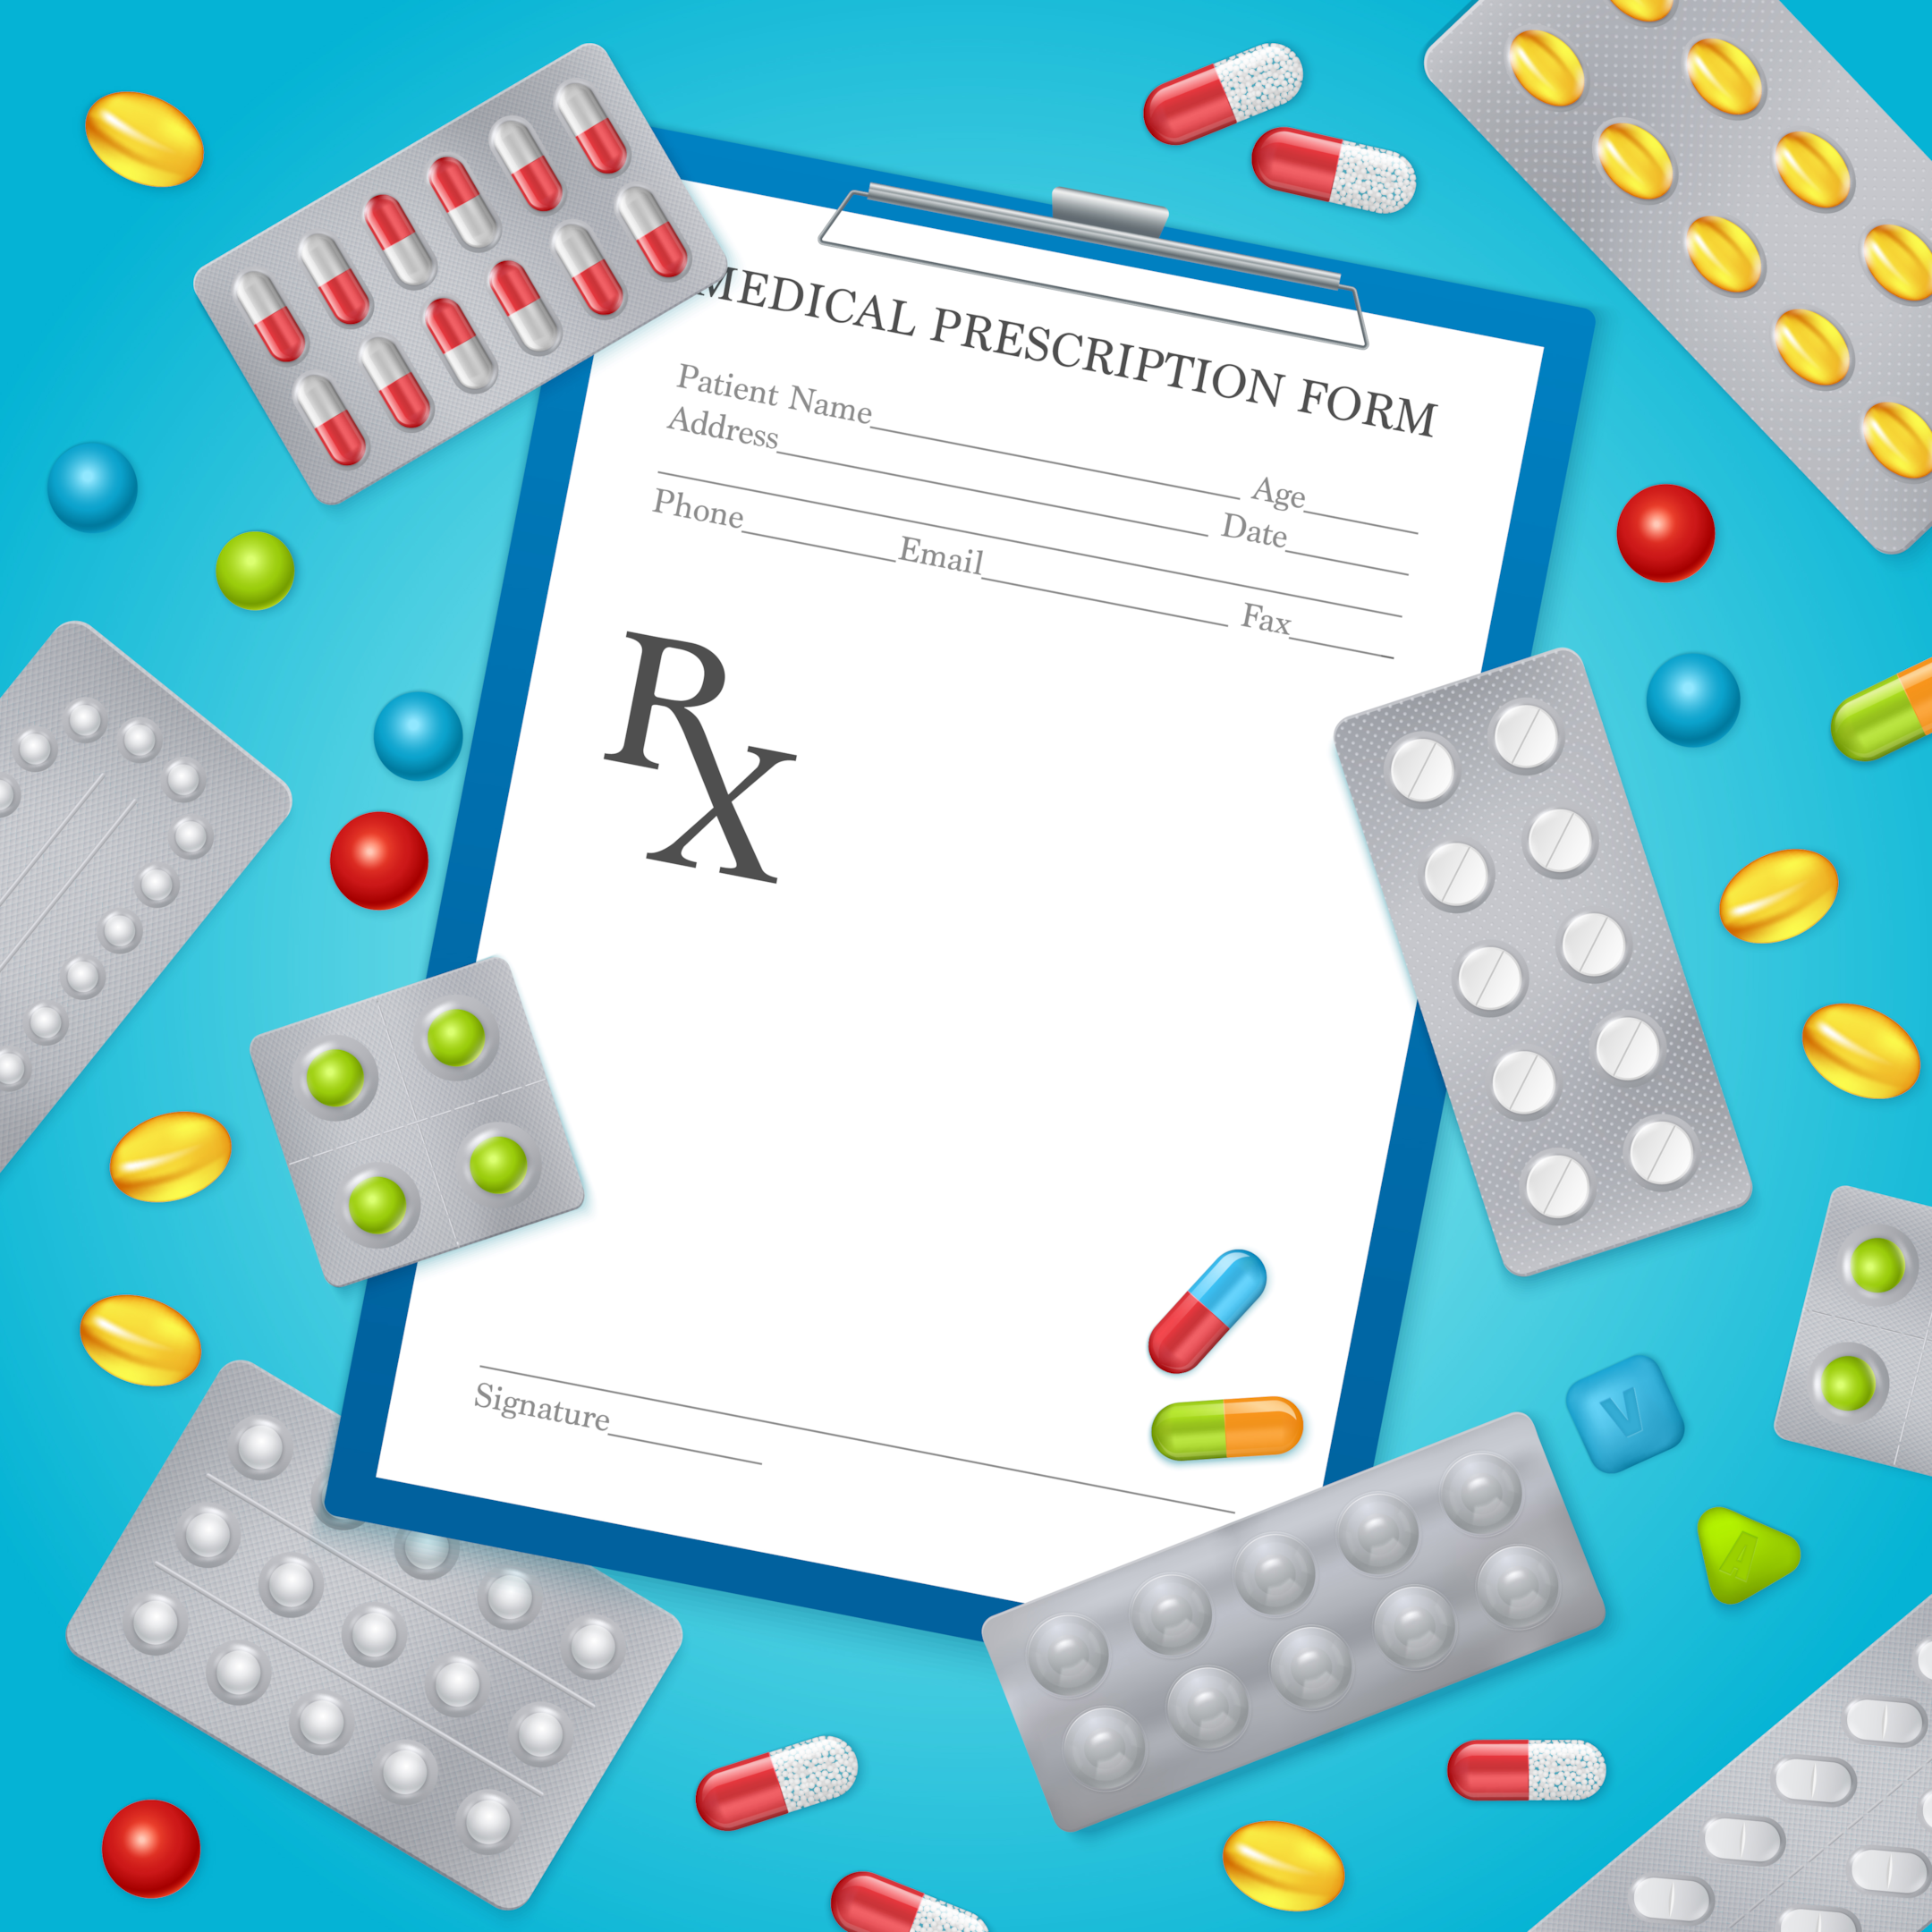 Prescription is required to purchase medicines.